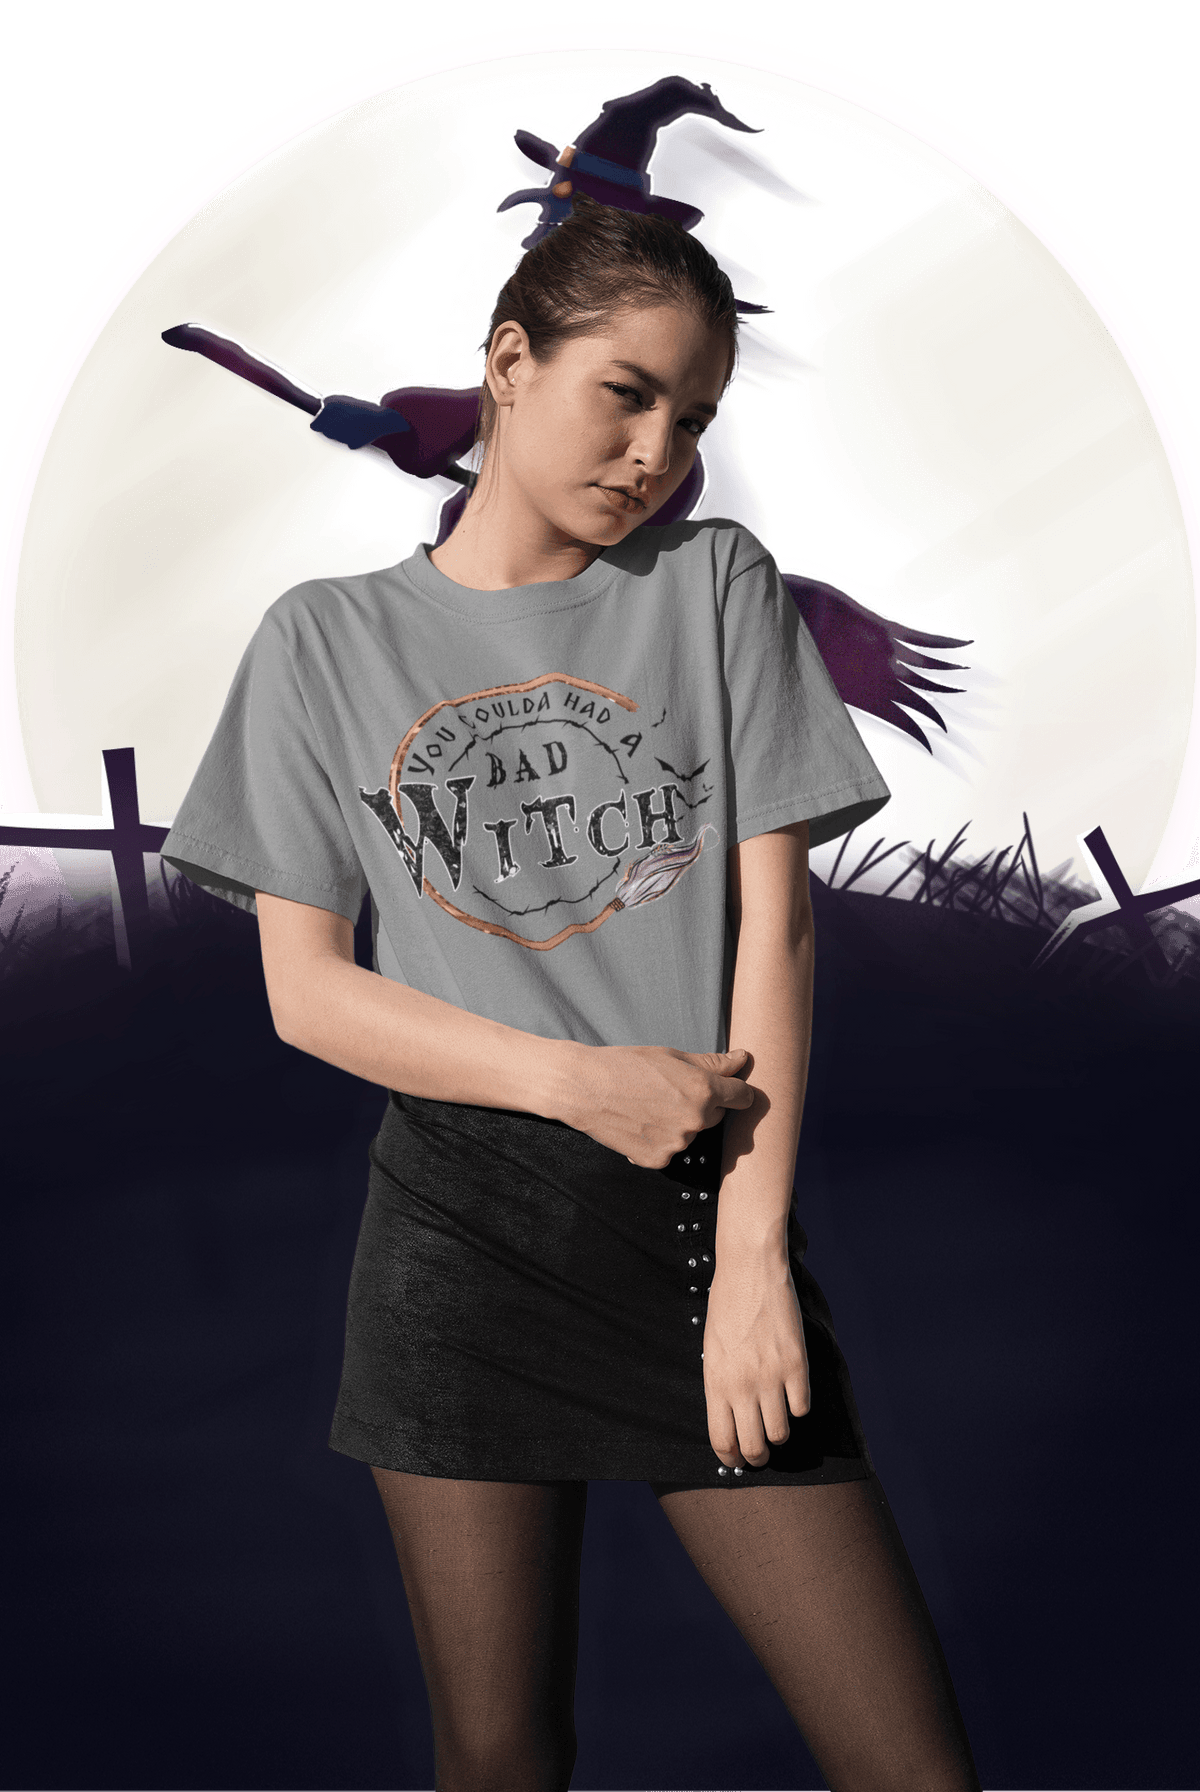 YOU COULDA HAD A BAD WITCH T-shirt-Regular Fit Tee-StylinArts